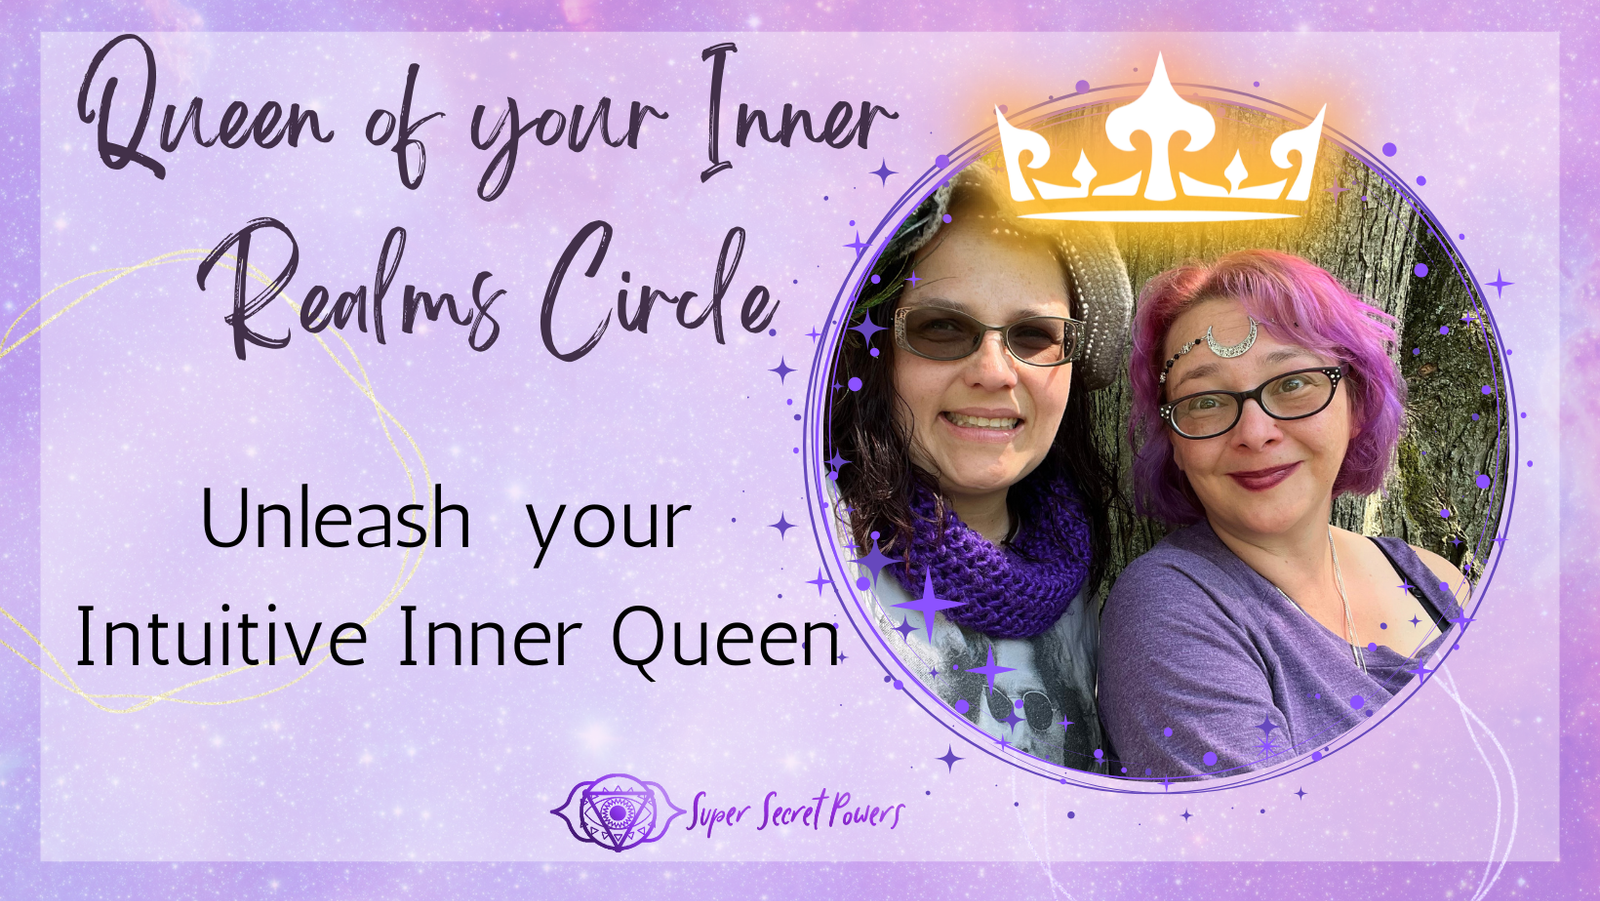 Queen of your Inner Realms Circle: for wild witchy lightworking intuitive women